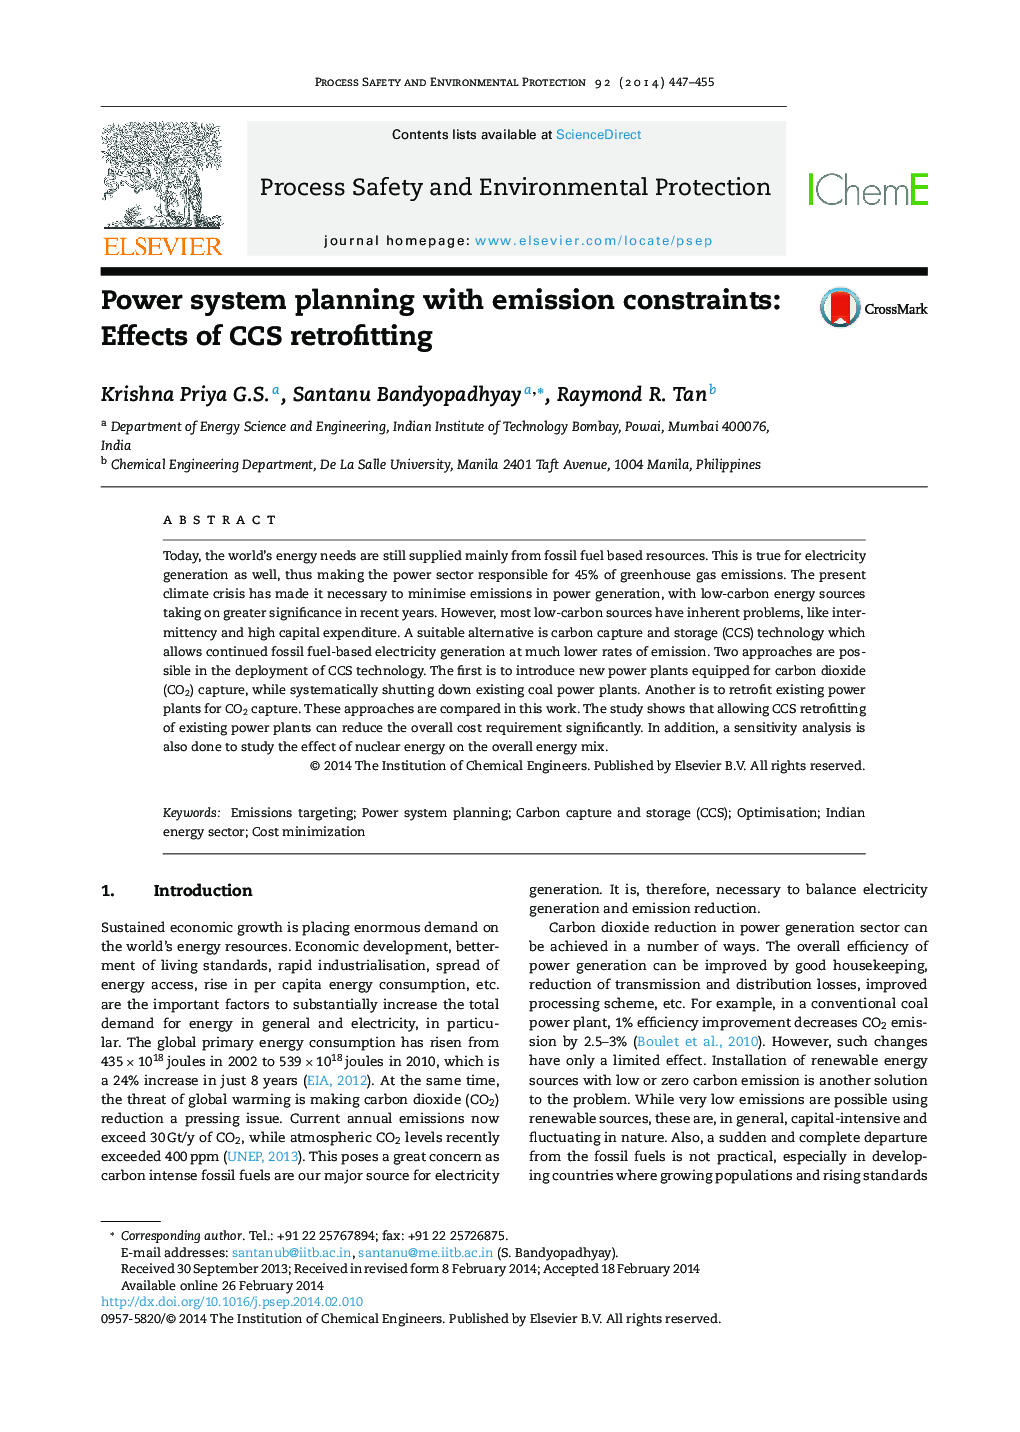 Power system planning with emission constraints: Effects of CCS retrofitting